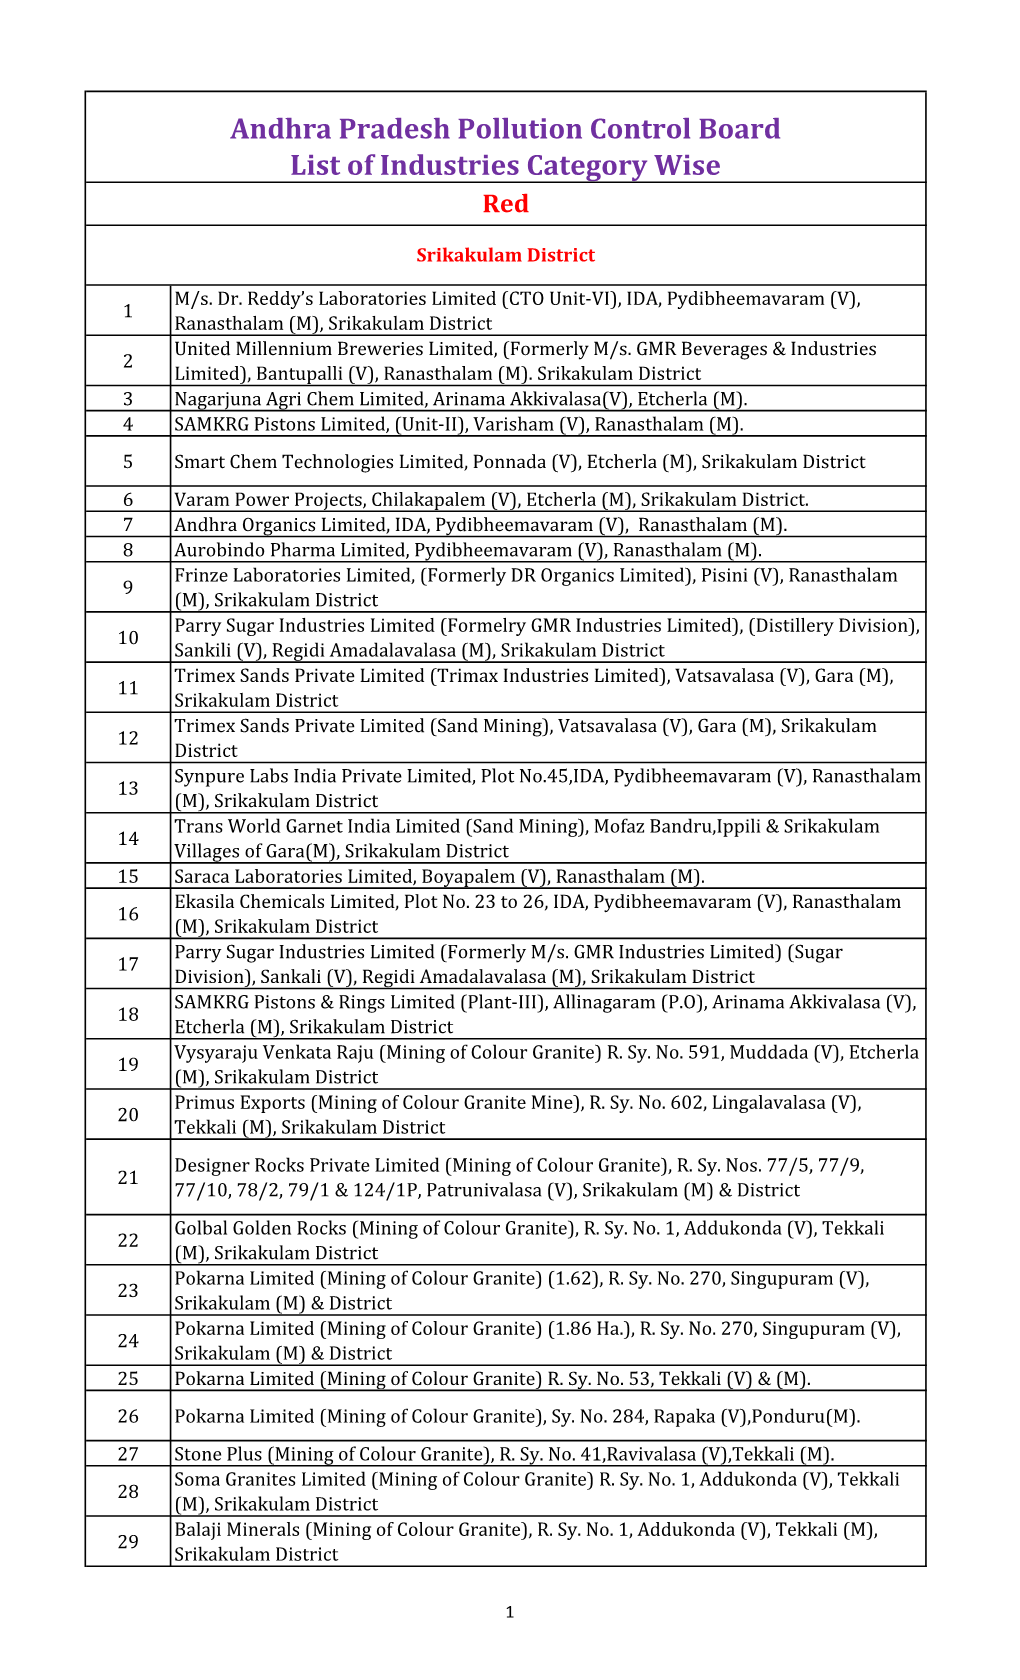 Andhra Pradesh Pollution Control Board List of Industries Category Wise Red